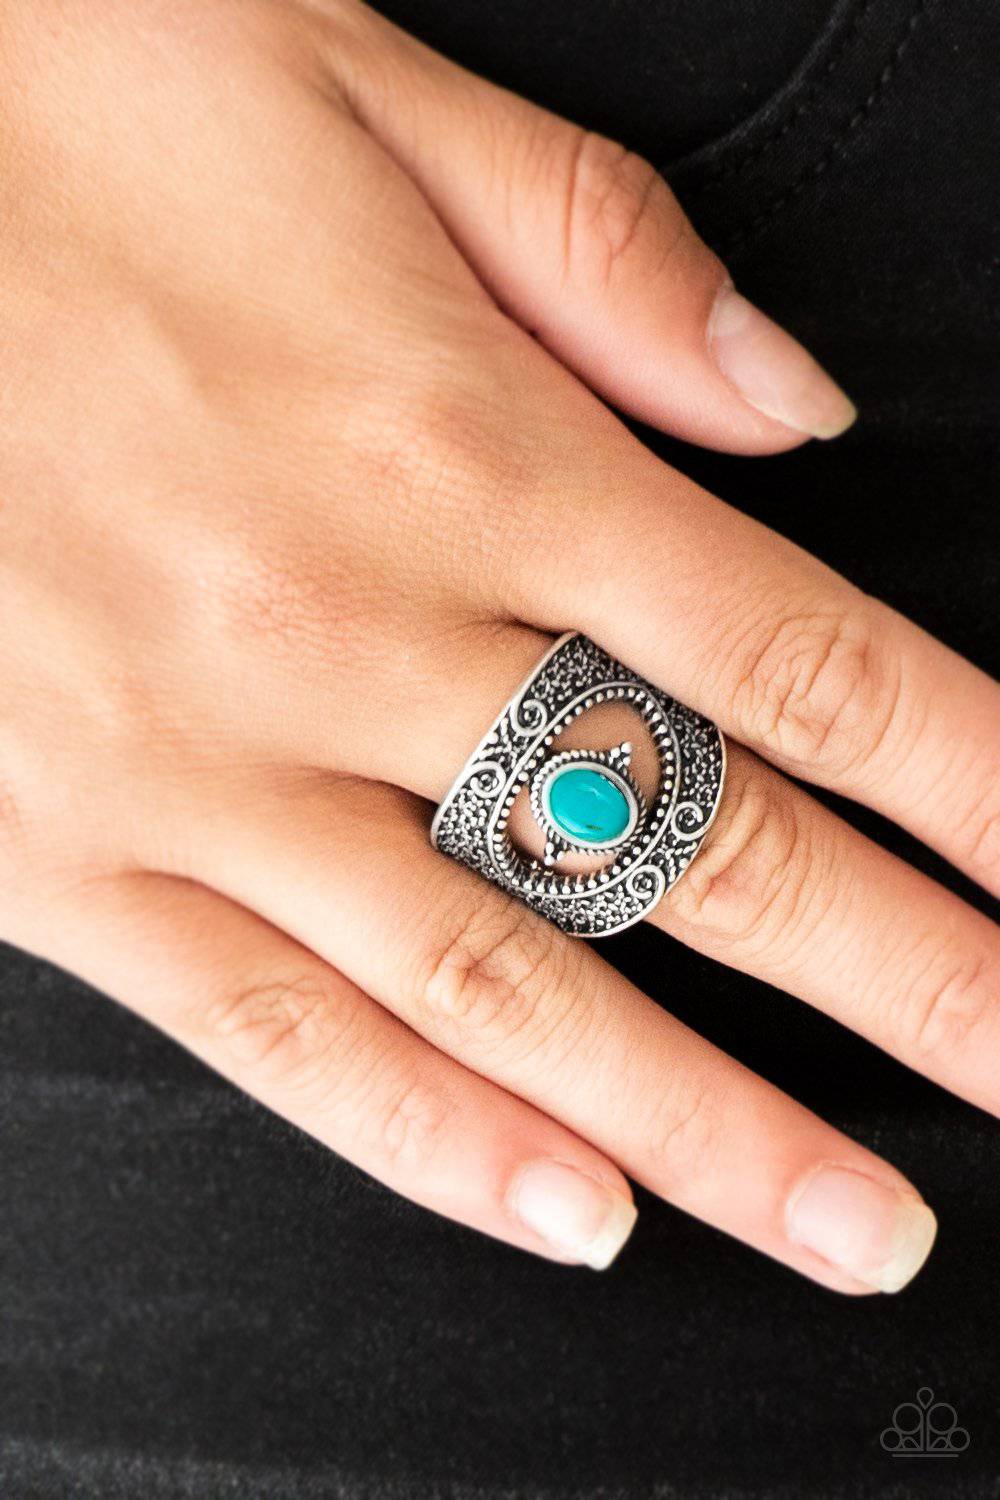 Rural Relic - Turquoise Blue Ring - Paparazzi Accessories - GlaMarous Titi Jewels